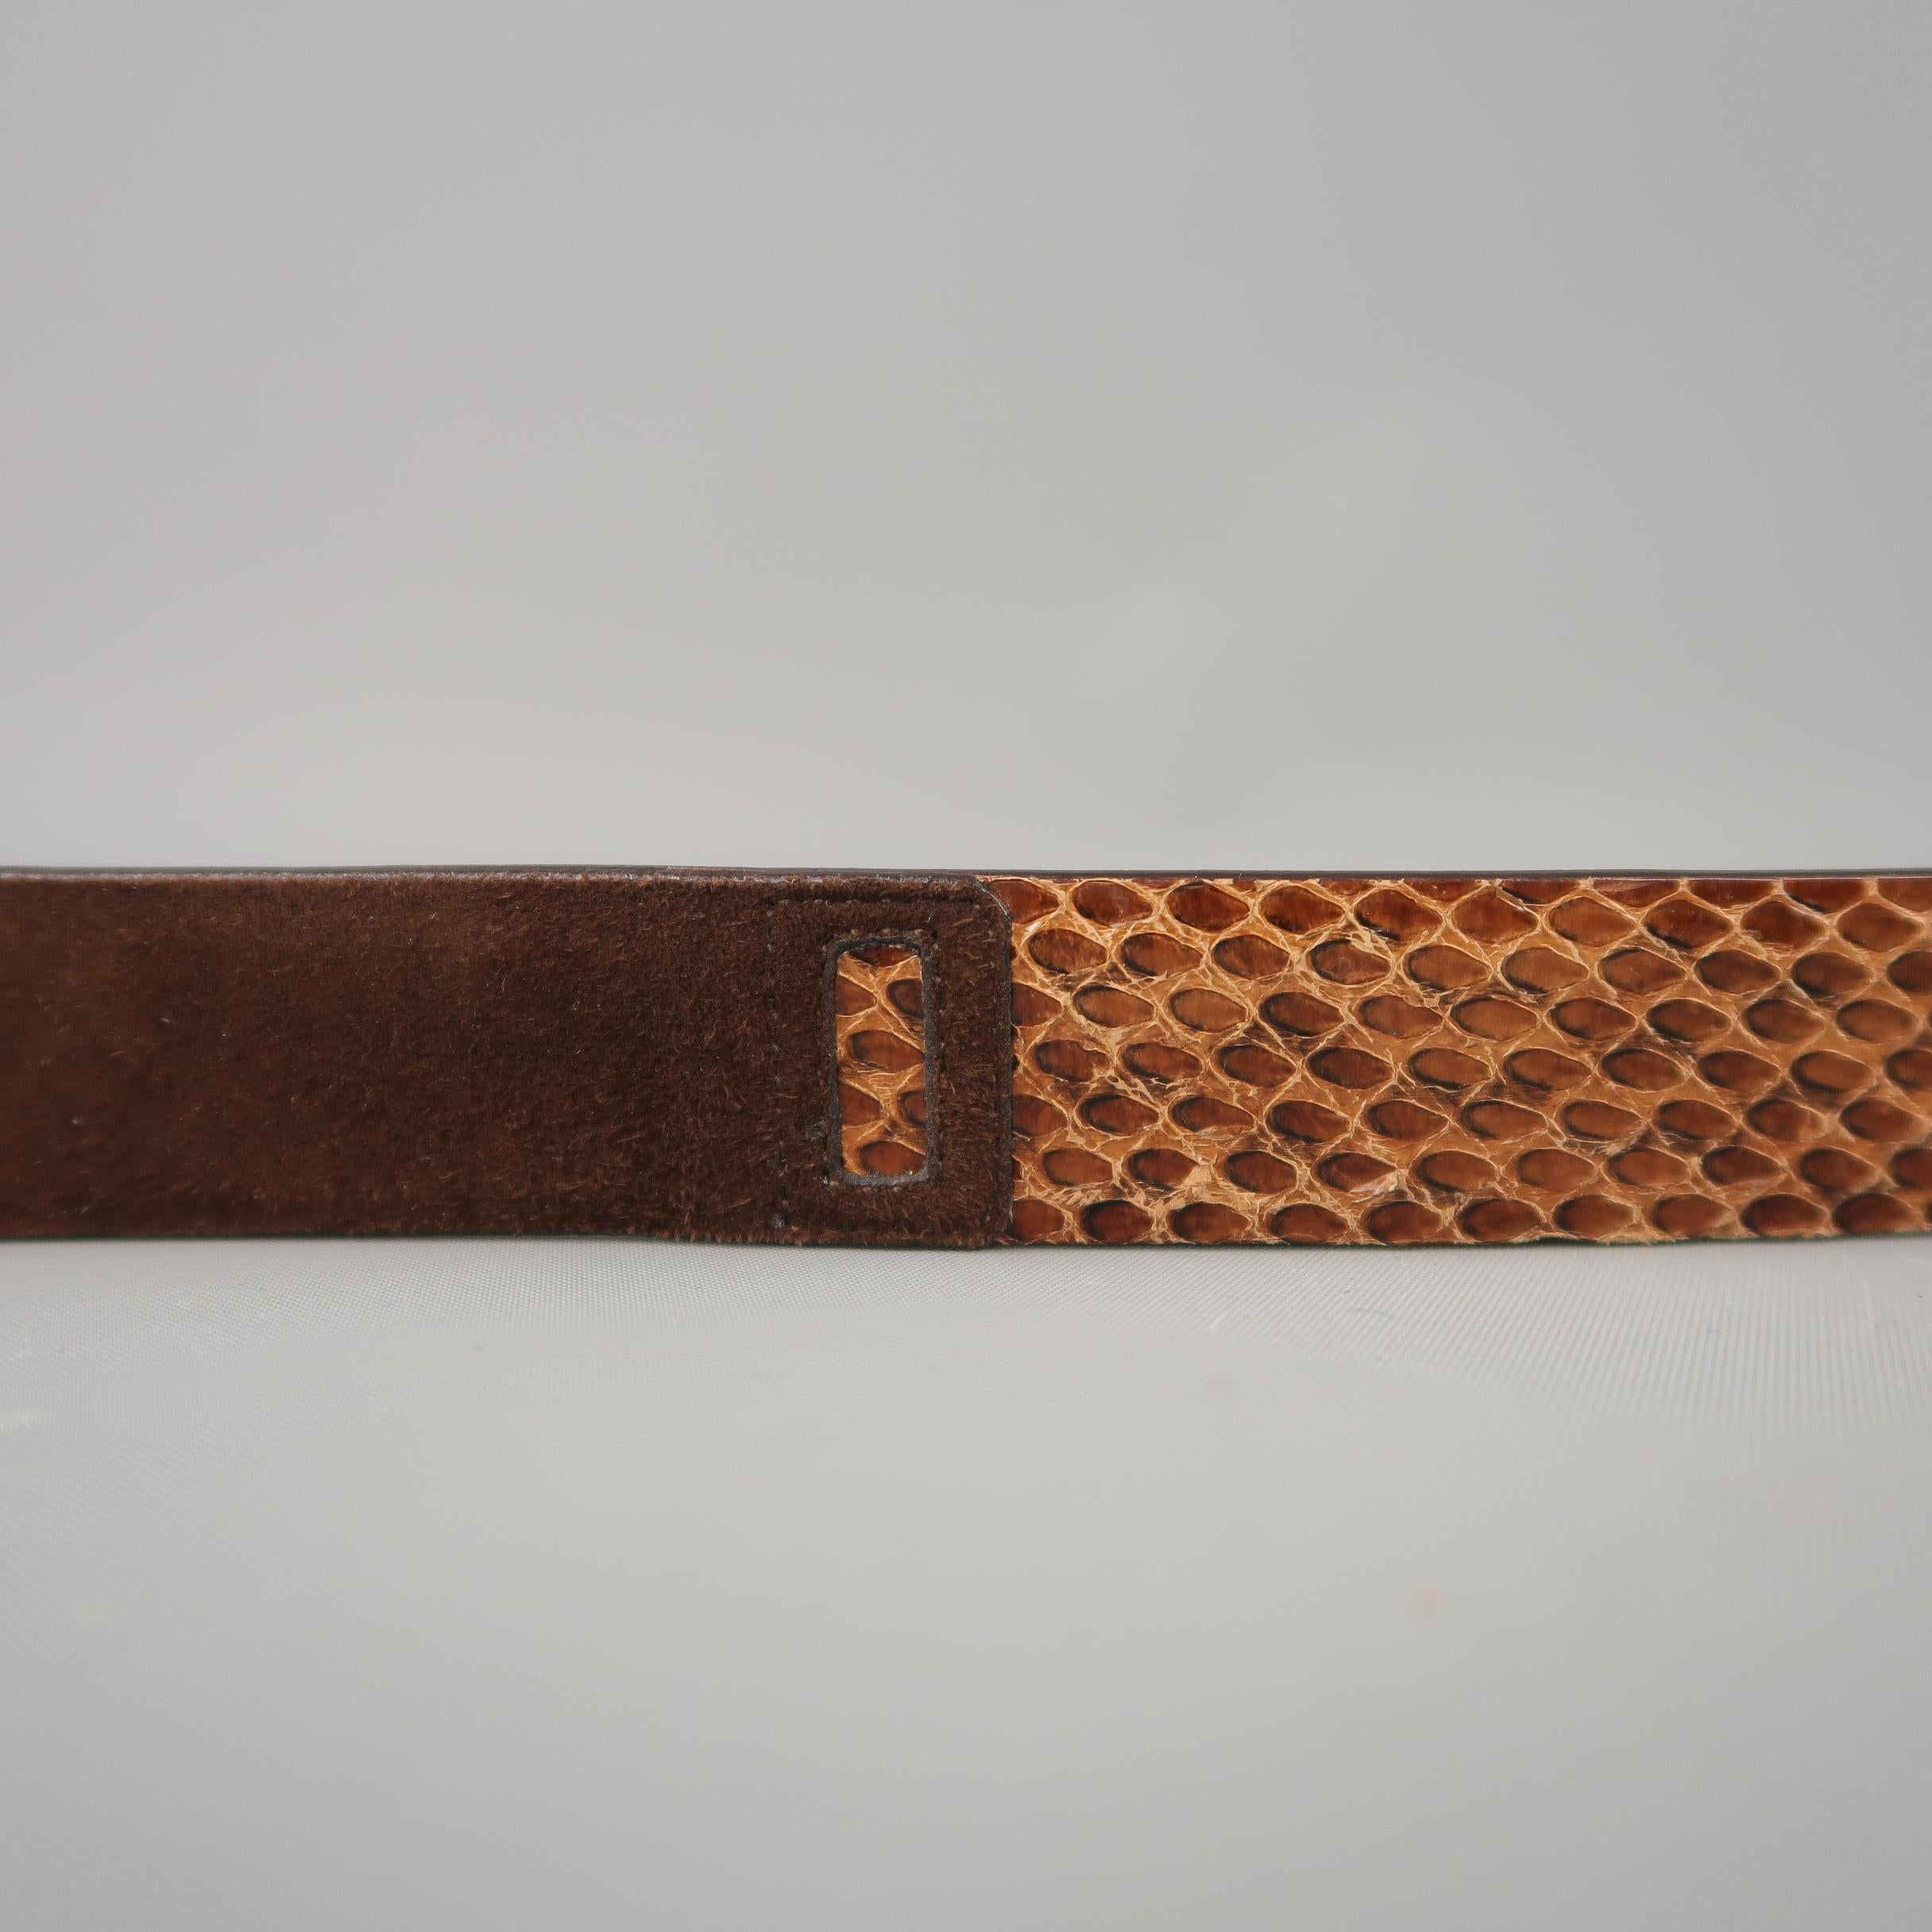 DOLCE & GABBANA belt features a slit snakeskin and suede material strap with a gold tone embossed buckle. Wear throughout. As-is. Made in Italy.
 
Good Pre-Owned Condition.
Marked: 90 cm - 36 in.
 
Length: 41 in.
Width: 1 in.
Fits: 33- 37 in.